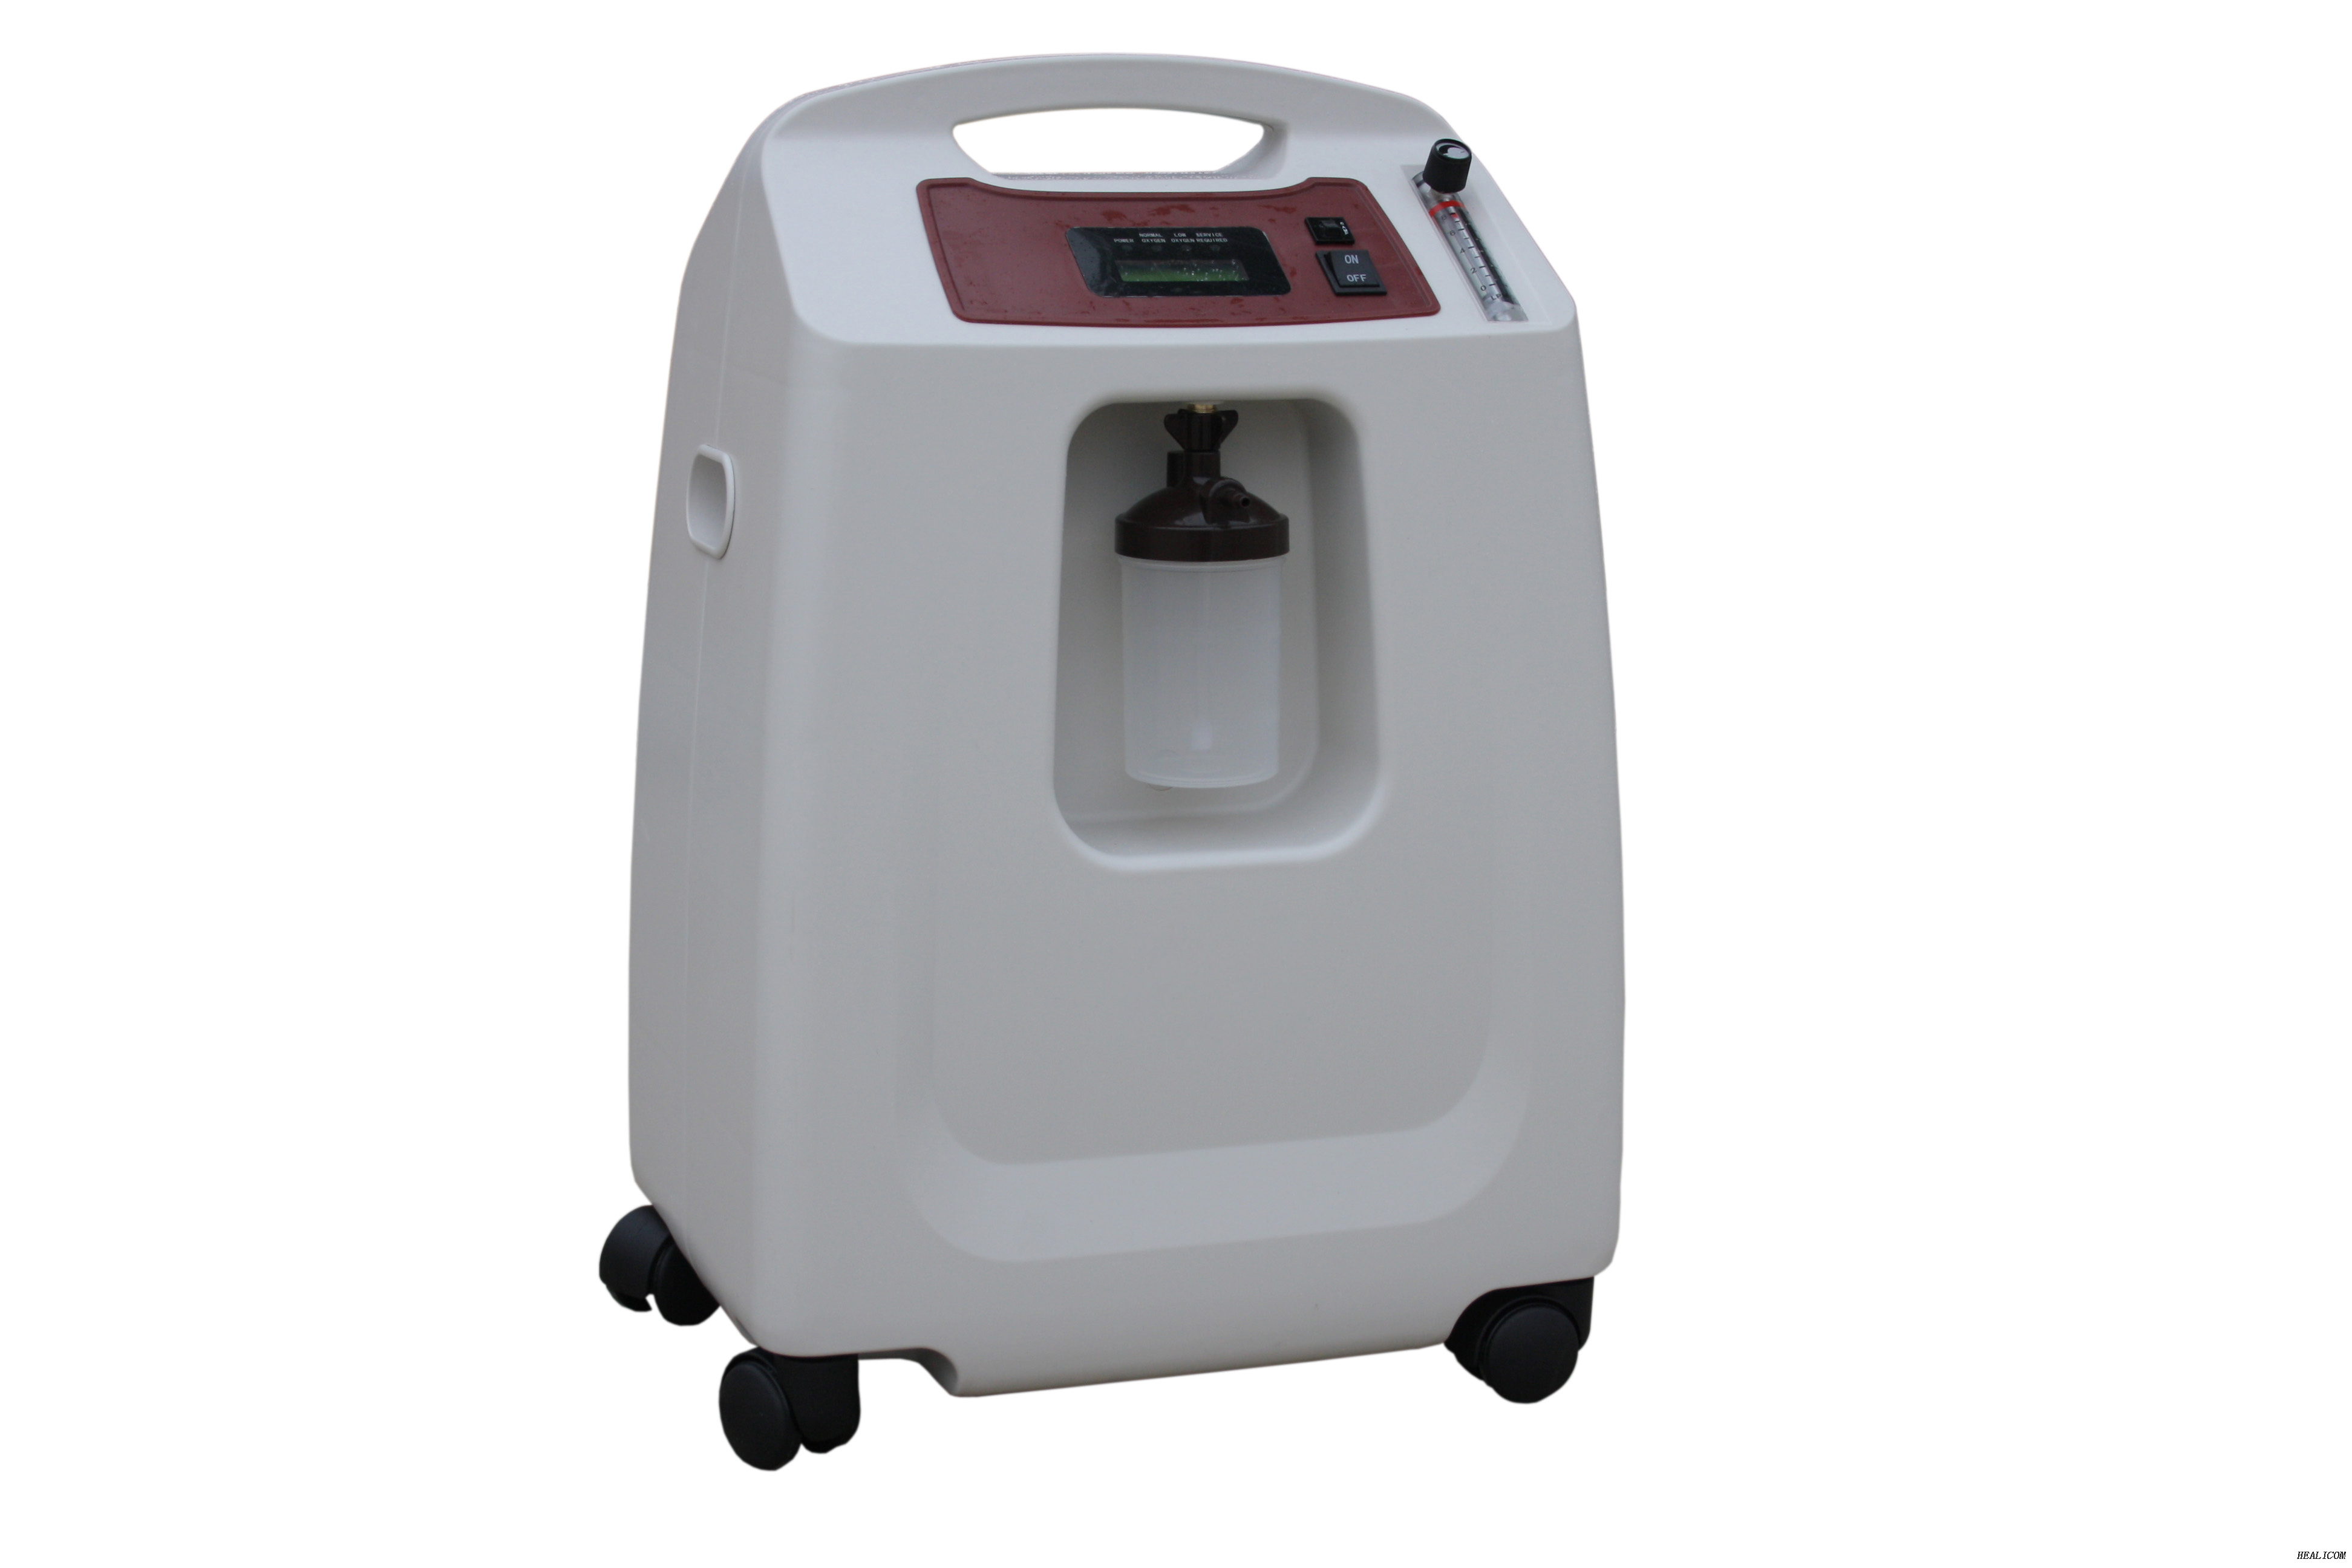 HO2-8AM High Quality Hospital Medical Portable Small Oxygen Concentrator